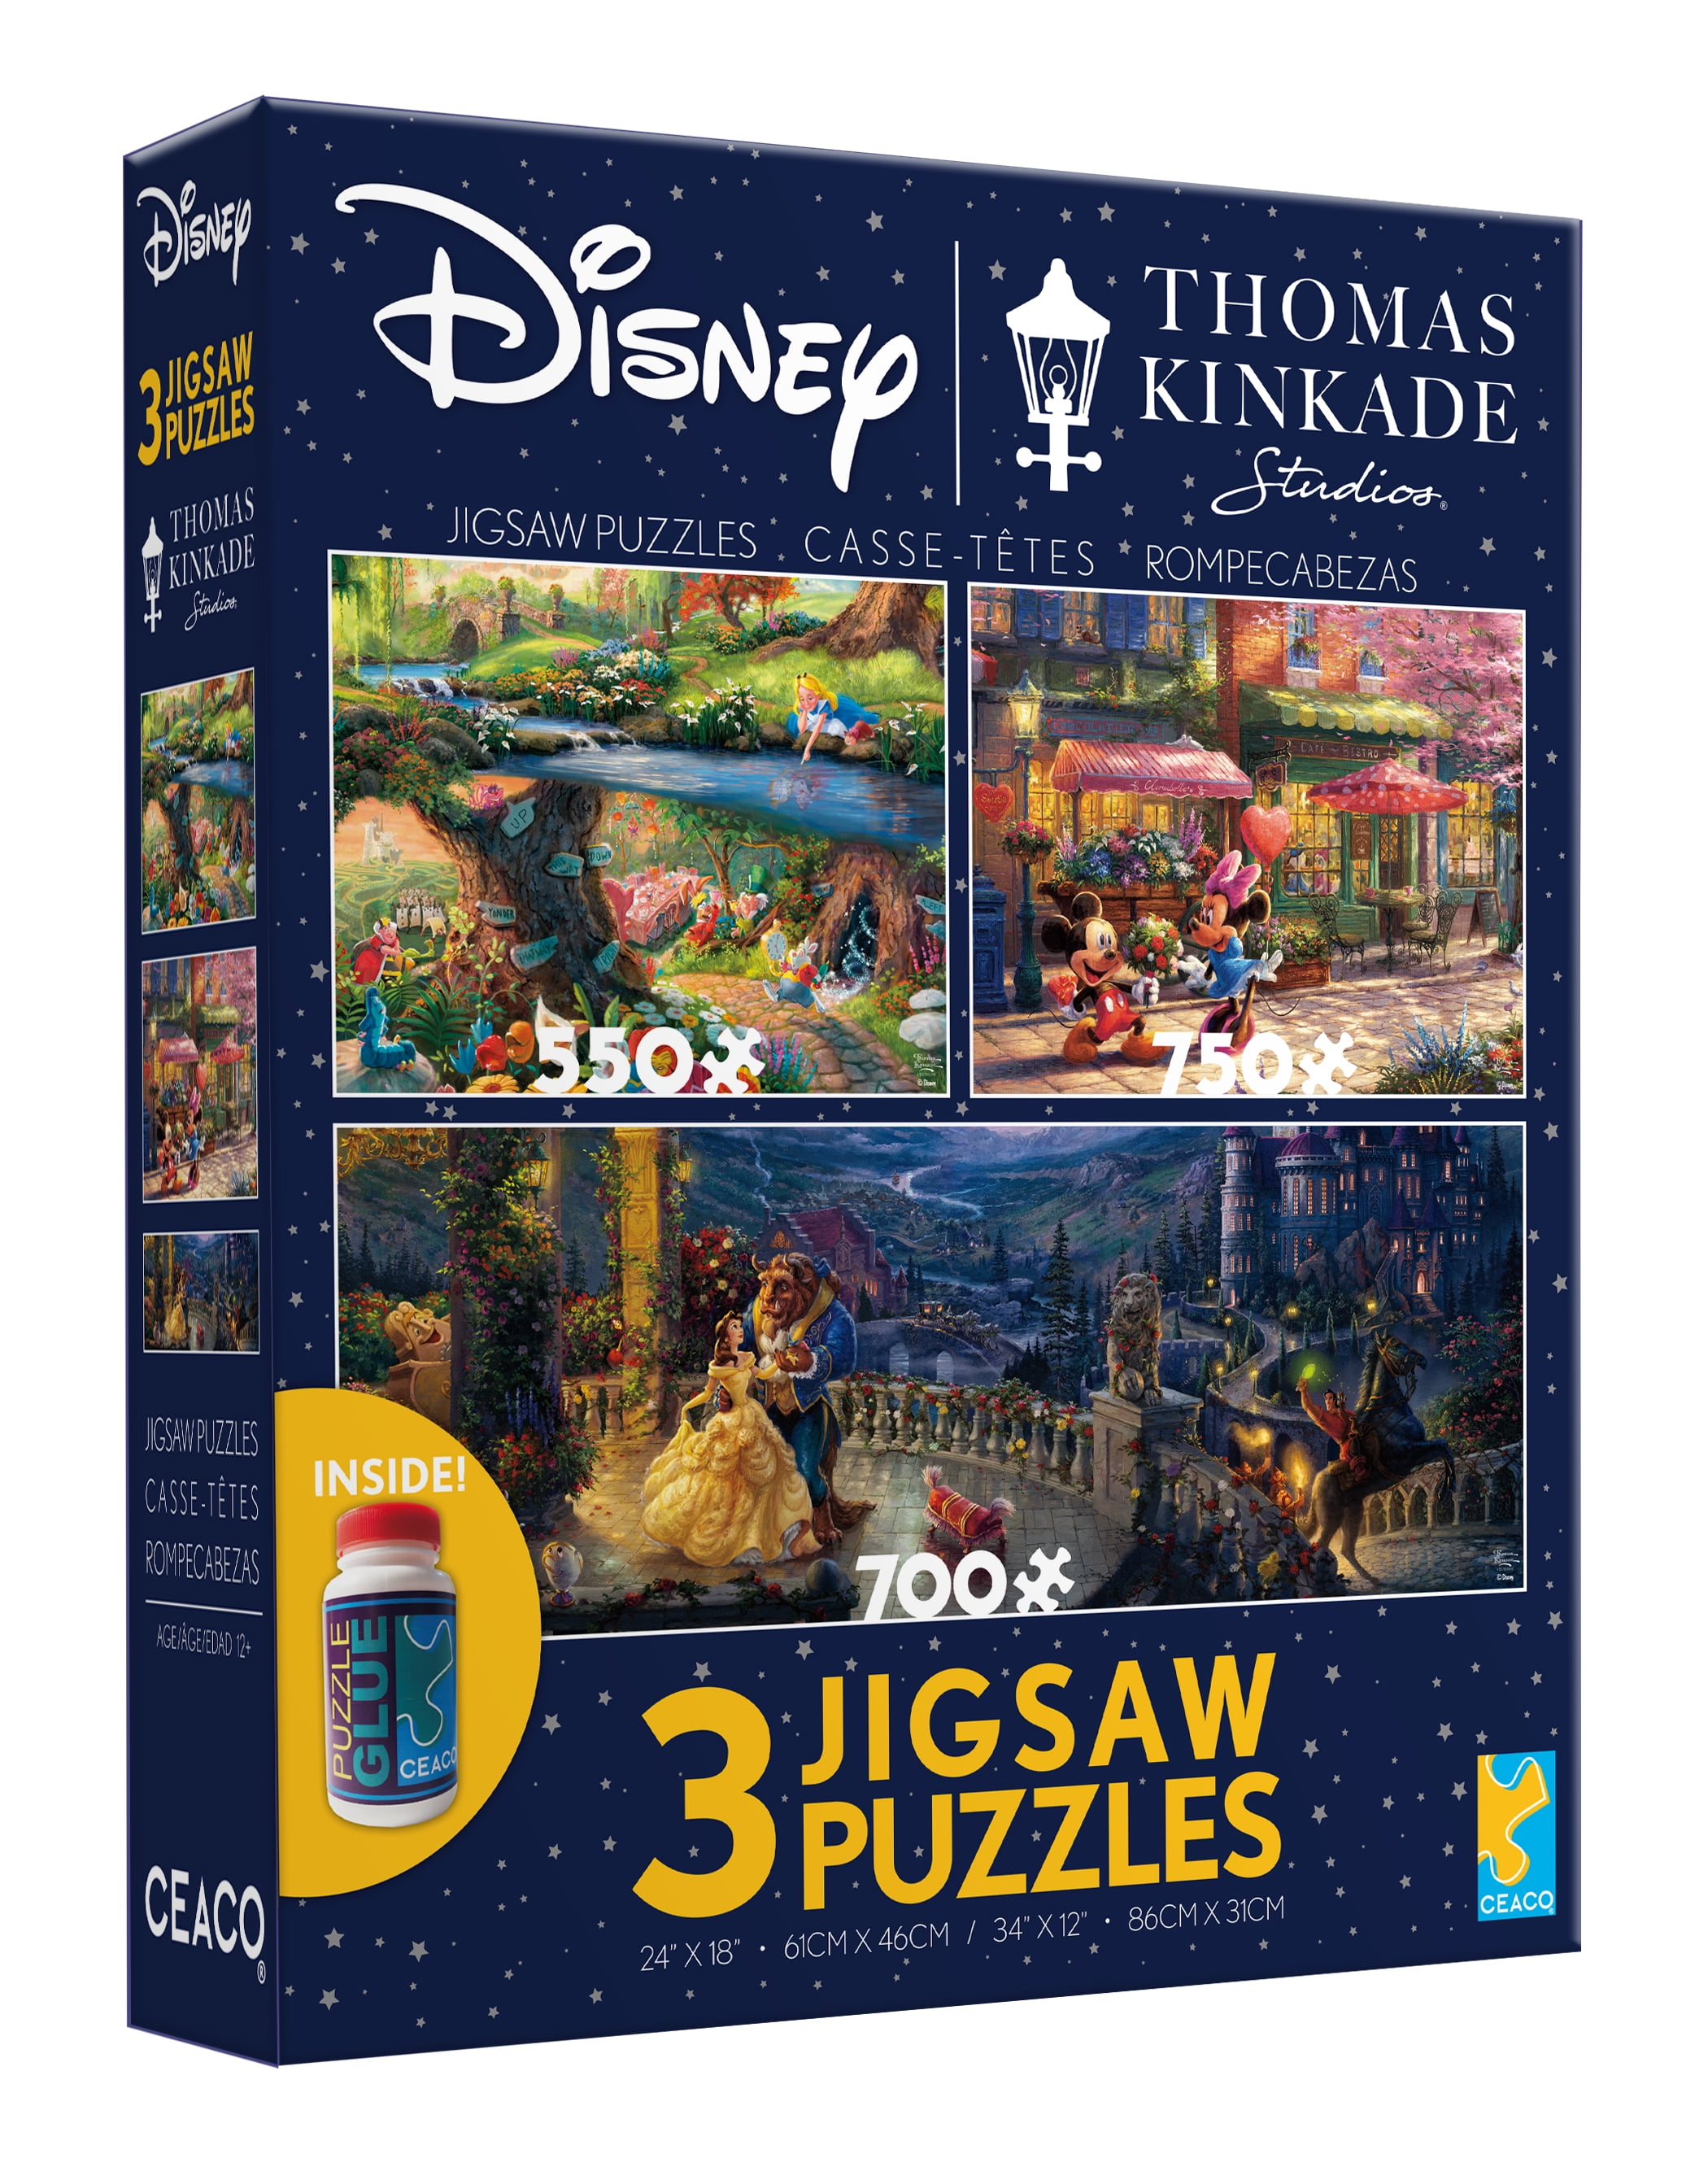 Ceaco 2903-3 Disney Thomas Kinkade Beauty and The Beast Castle 750 Pieces Puzzle for sale online 